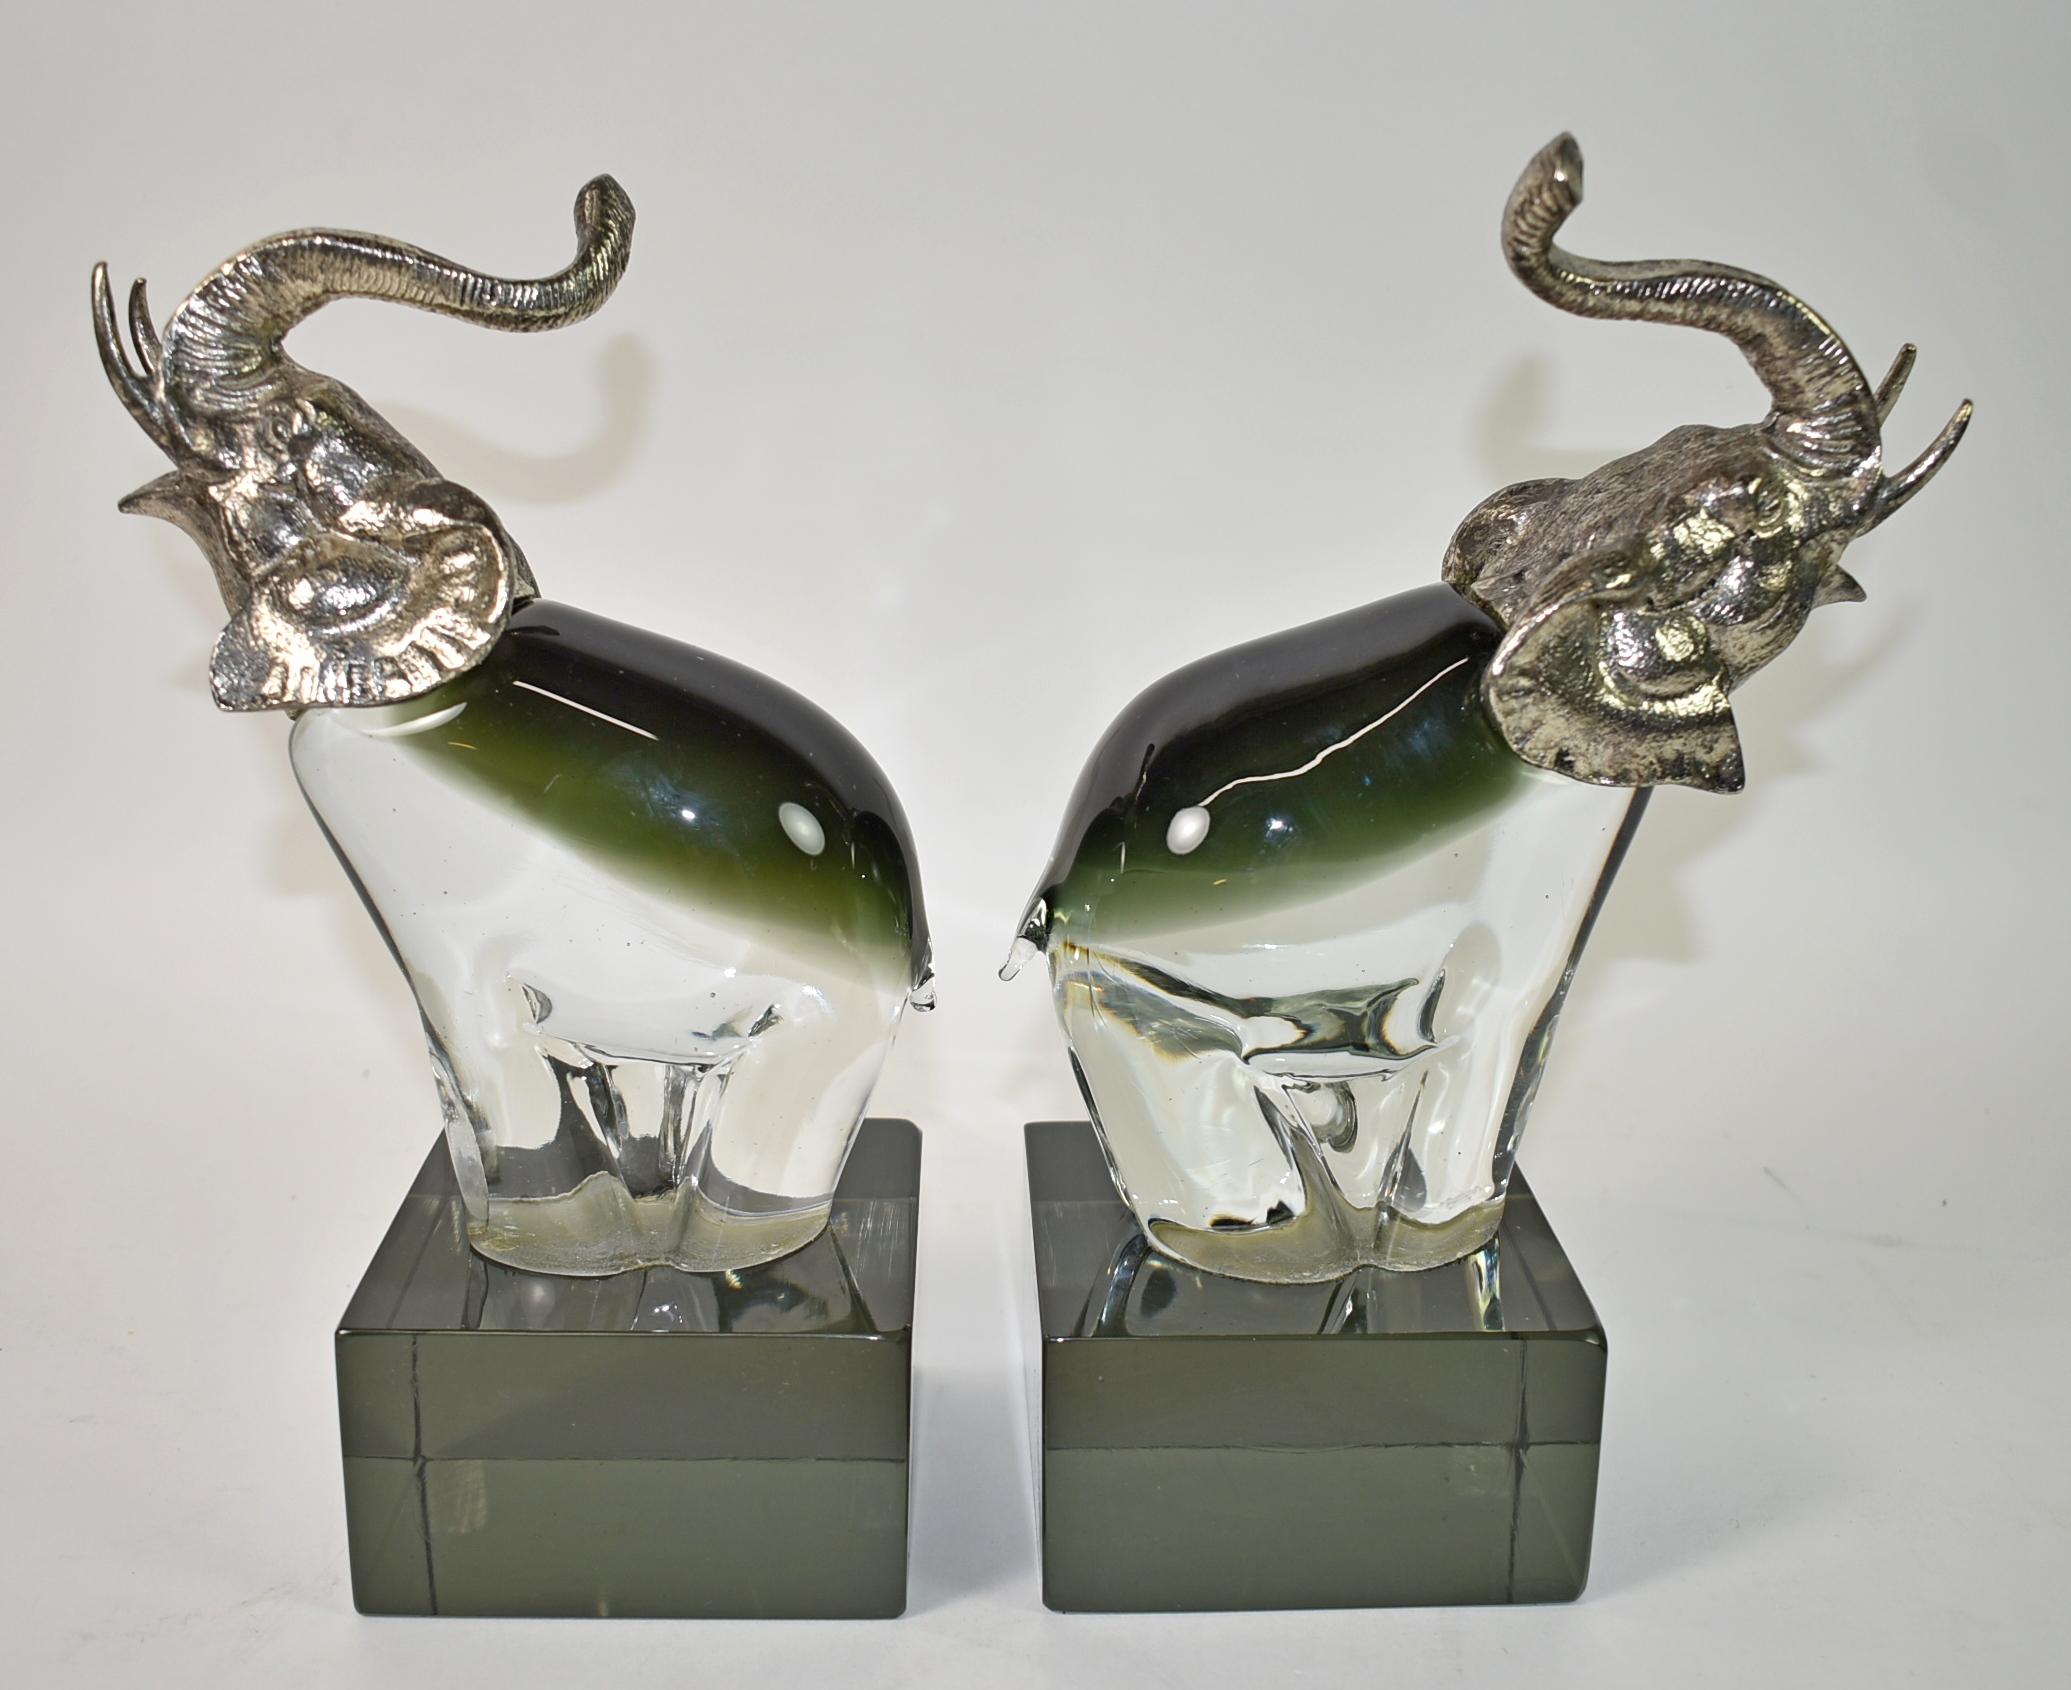 20th Century Pair of Art Glass Elephant Bookends For Sale